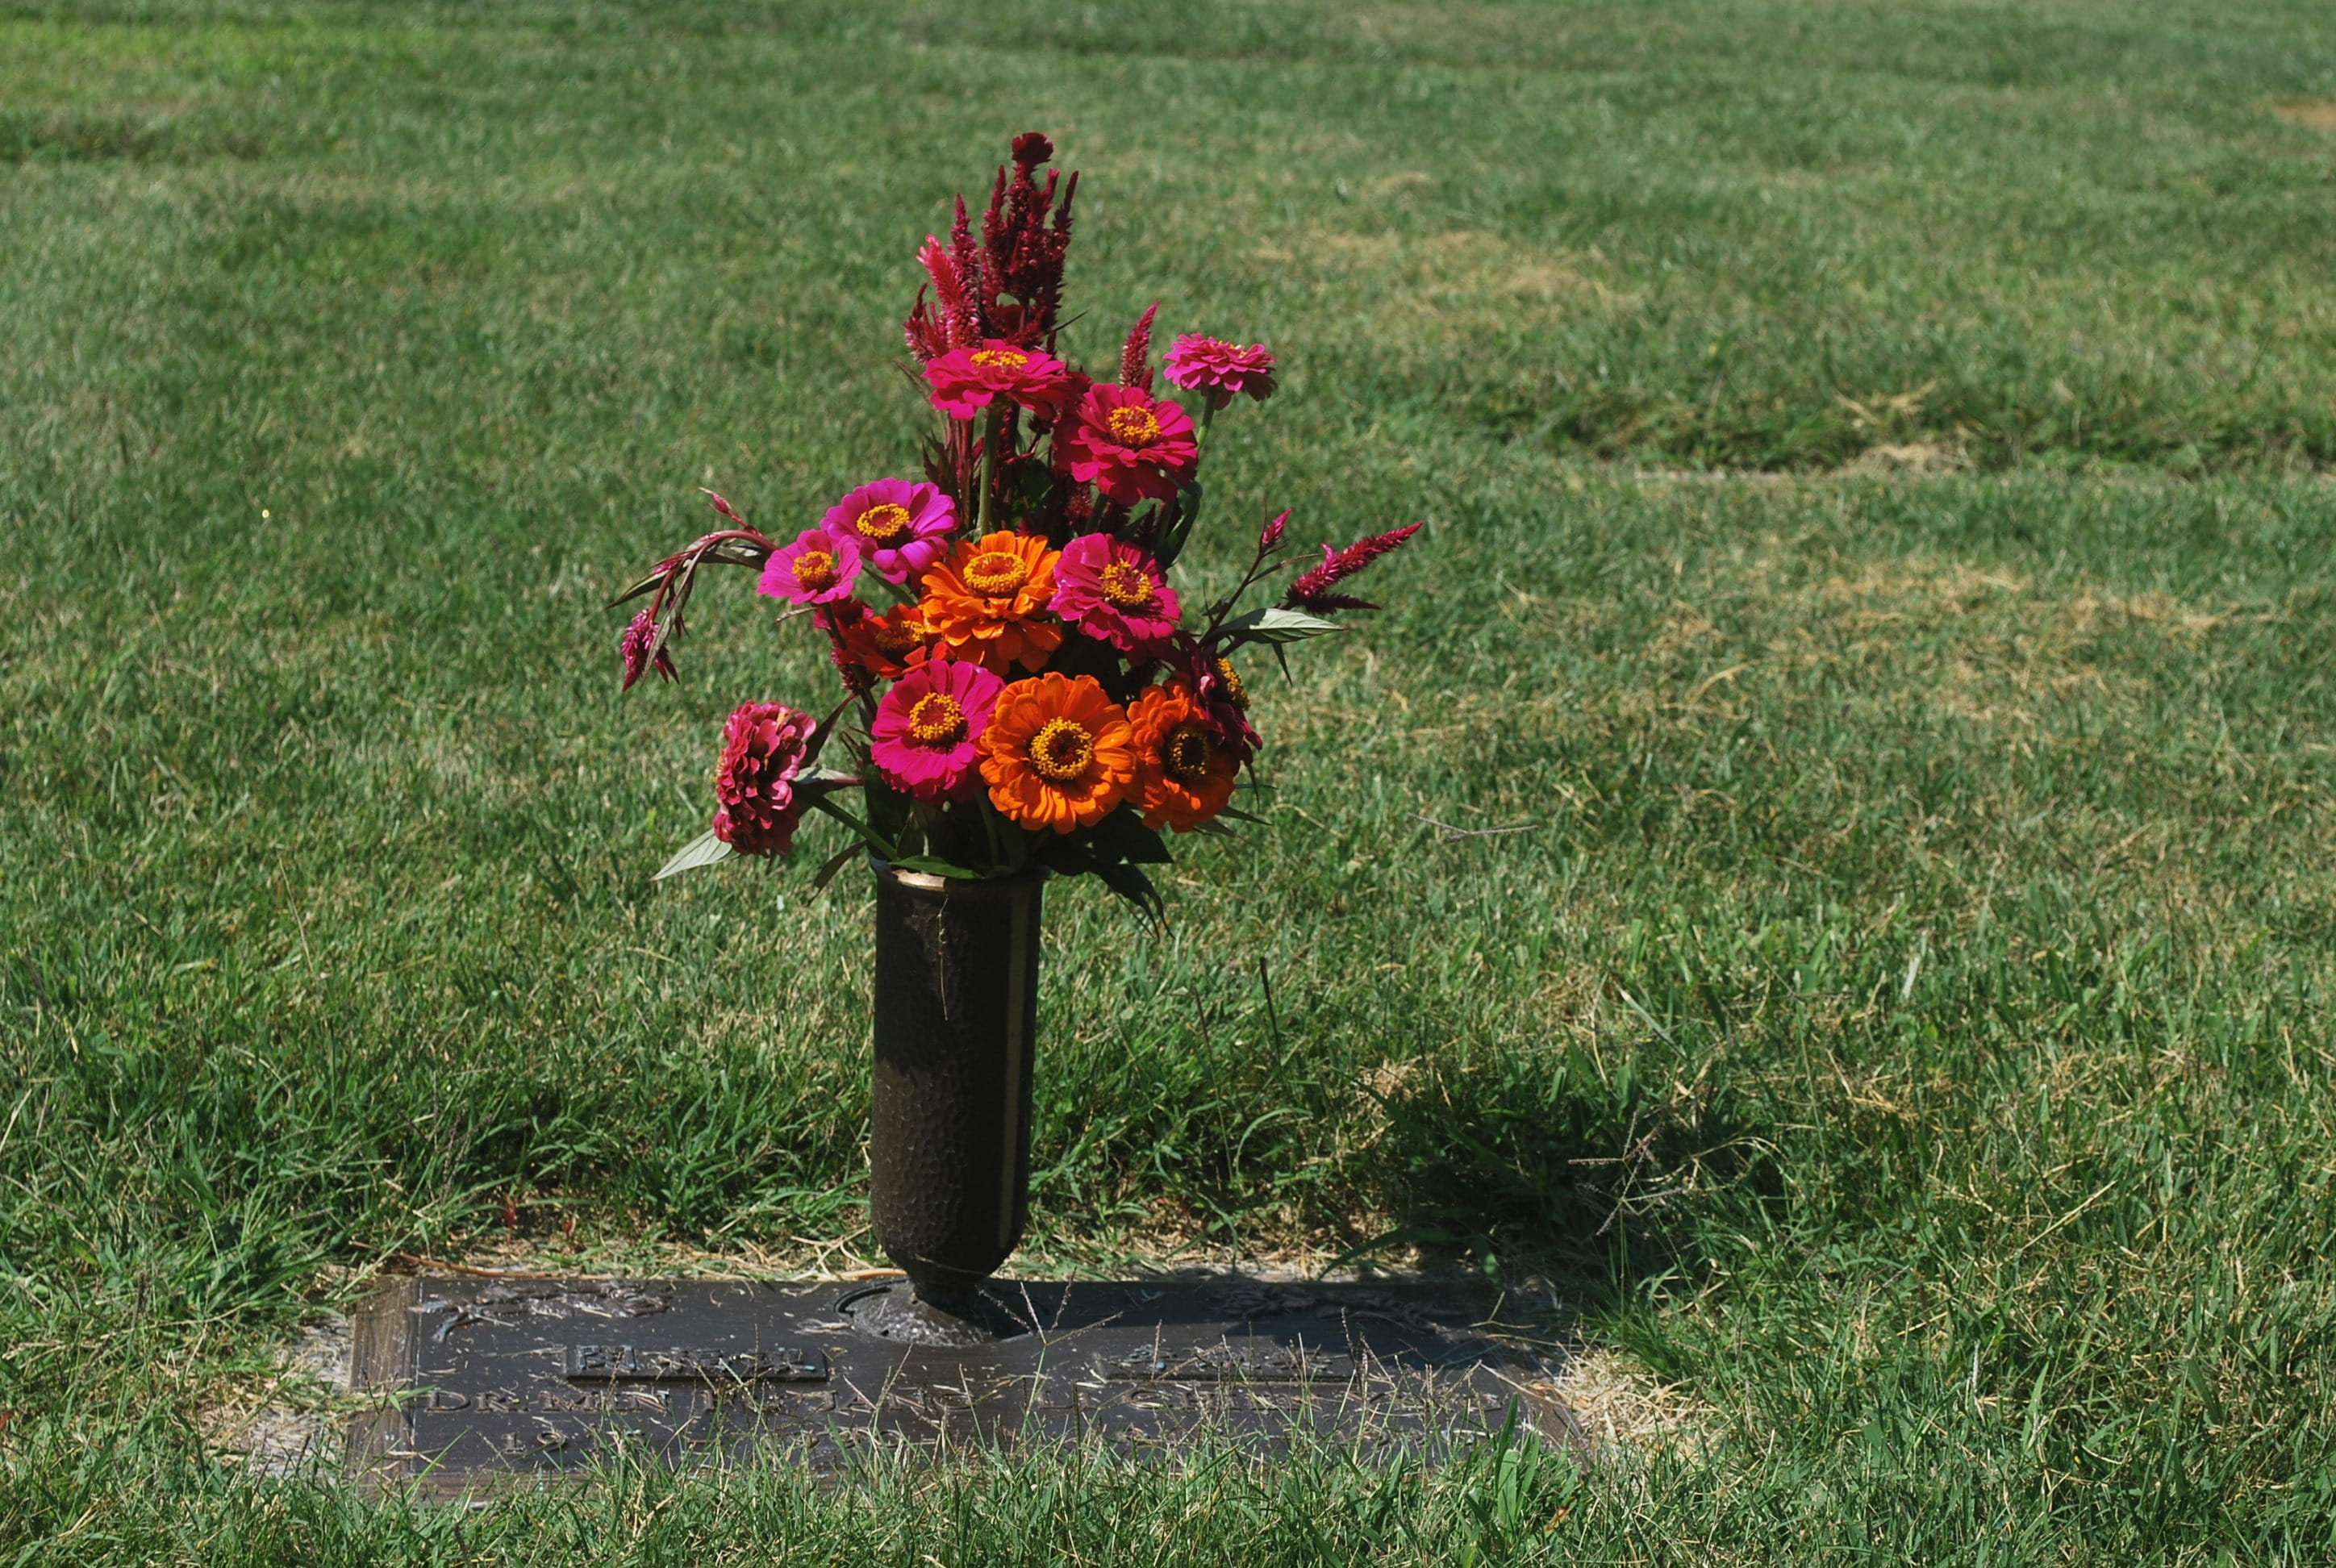 flowers on vase on tombstone, Grave, Urn, Cemetery, Death, dead